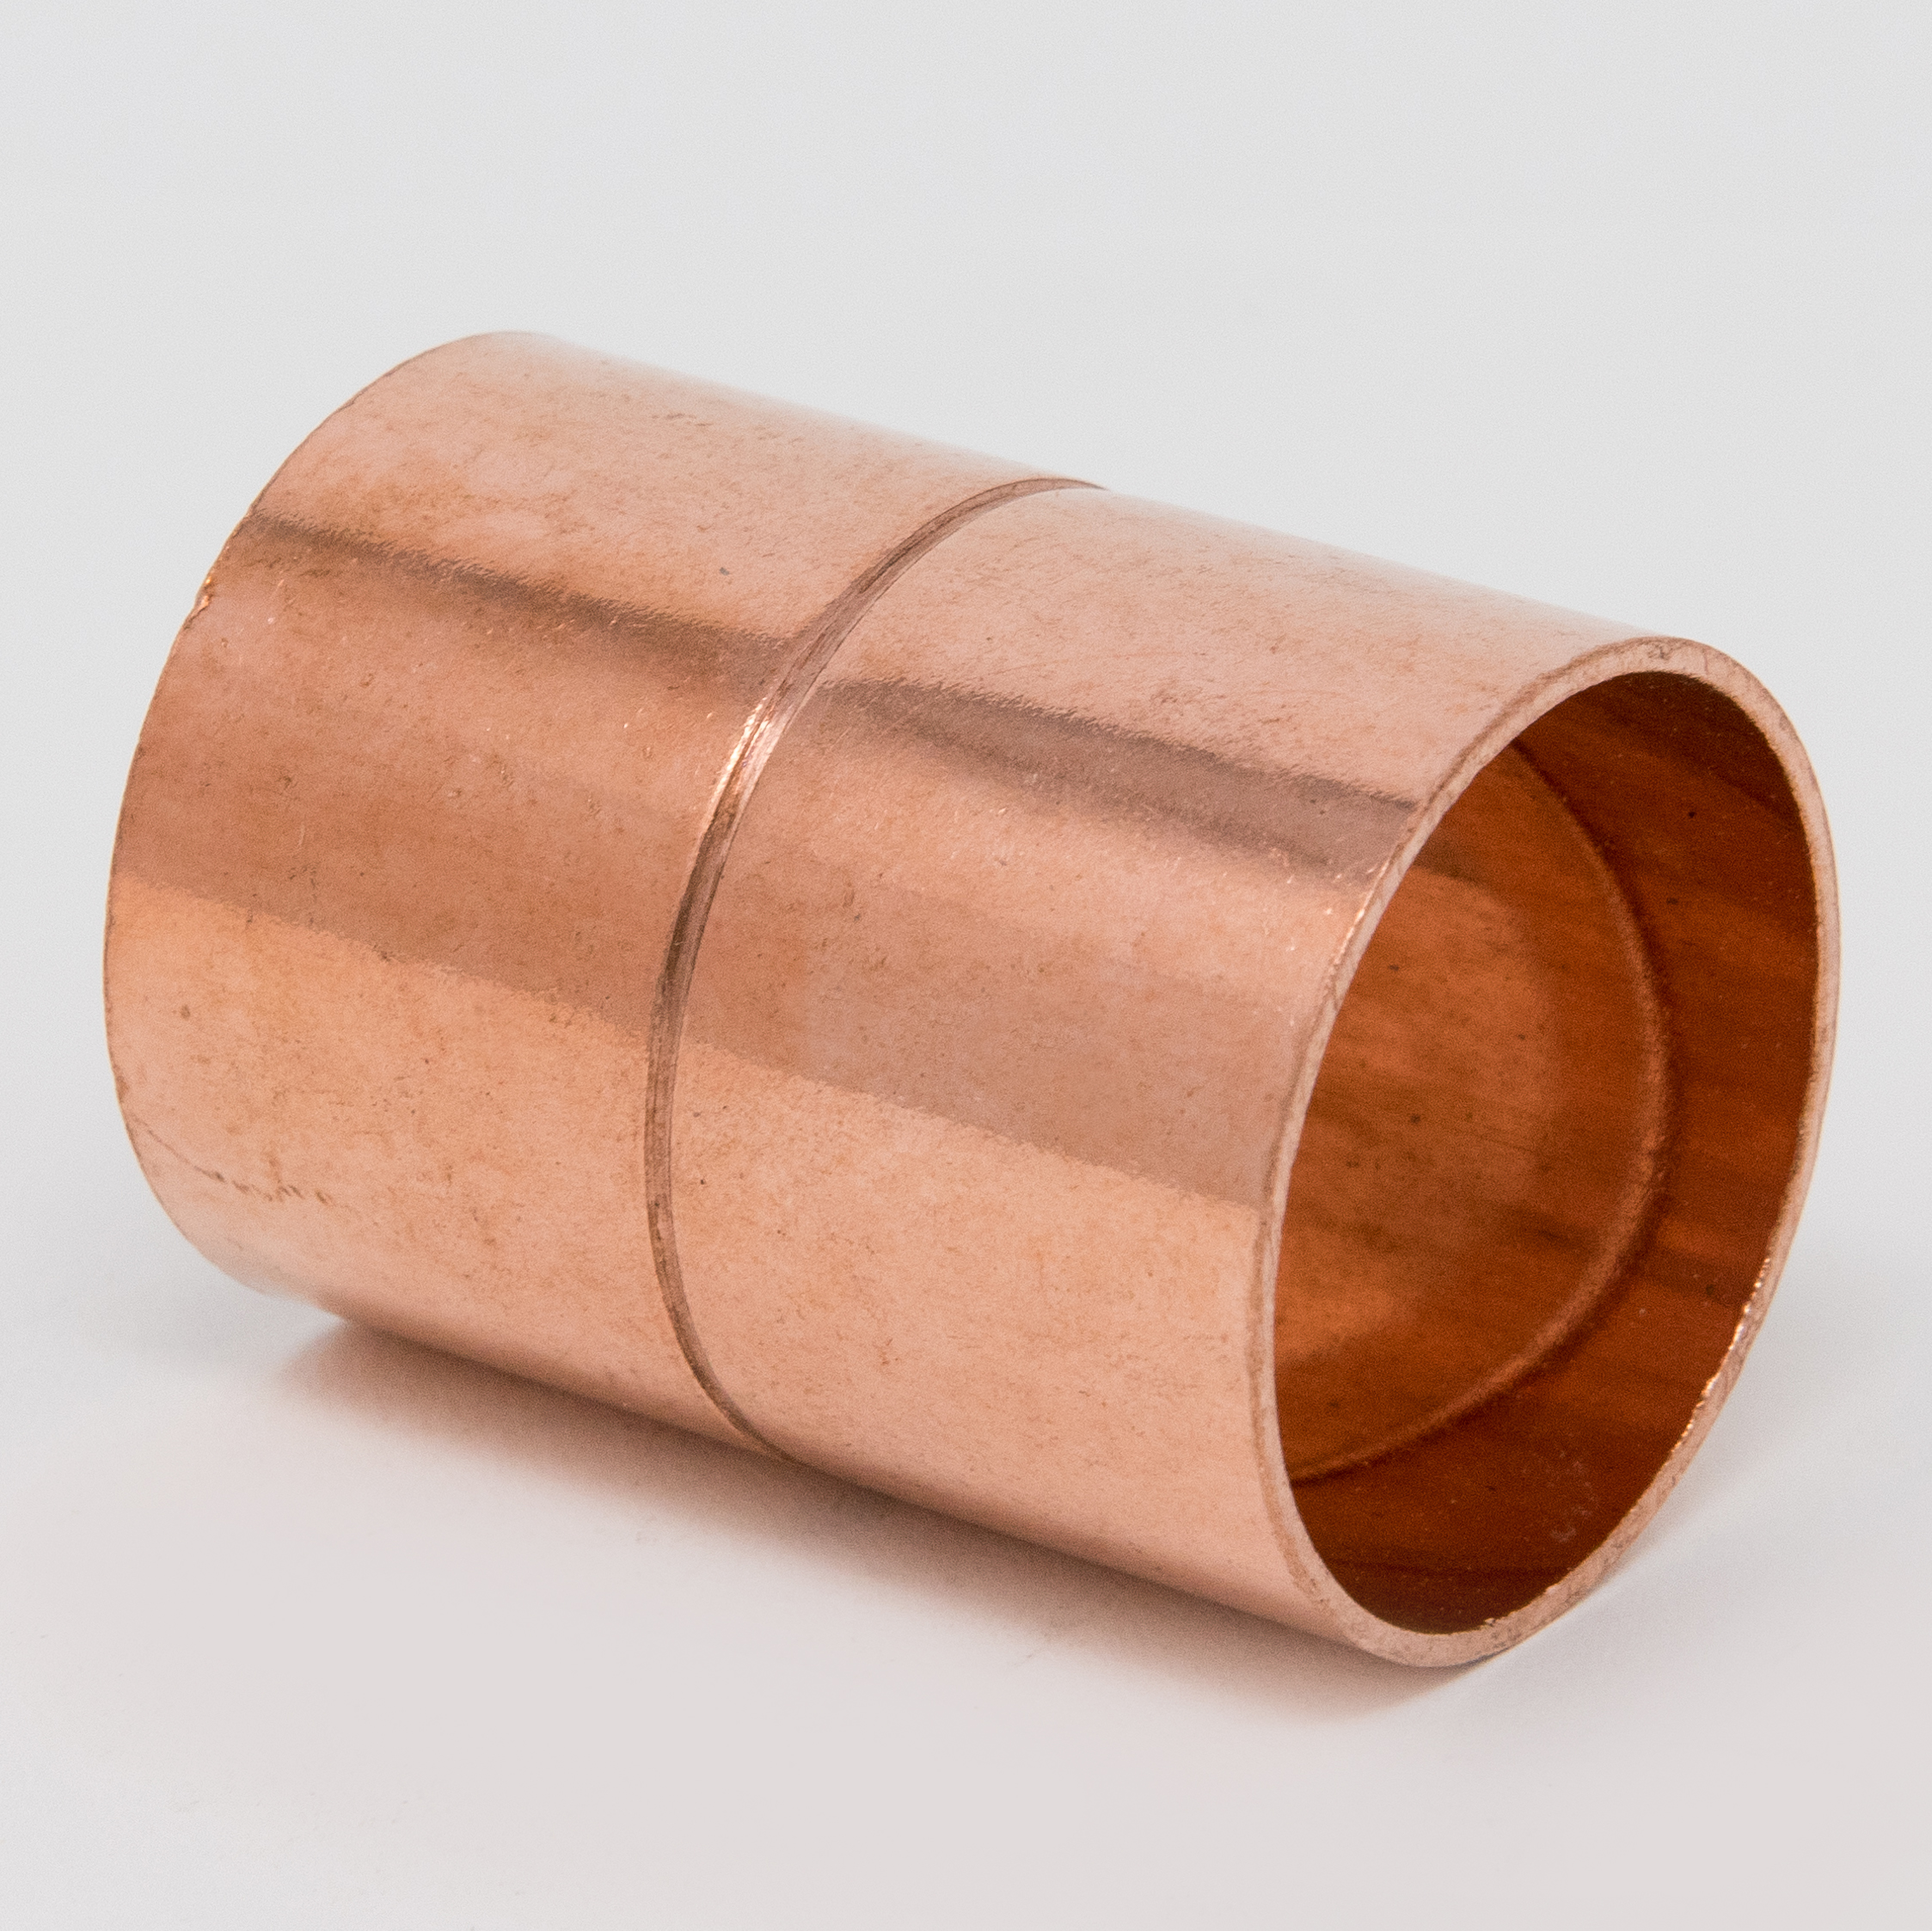 Streamline® W 01063 Rolled Stop Coupling, 1-1/2 in Nominal, C End Style, Wrot Copper, Domestic